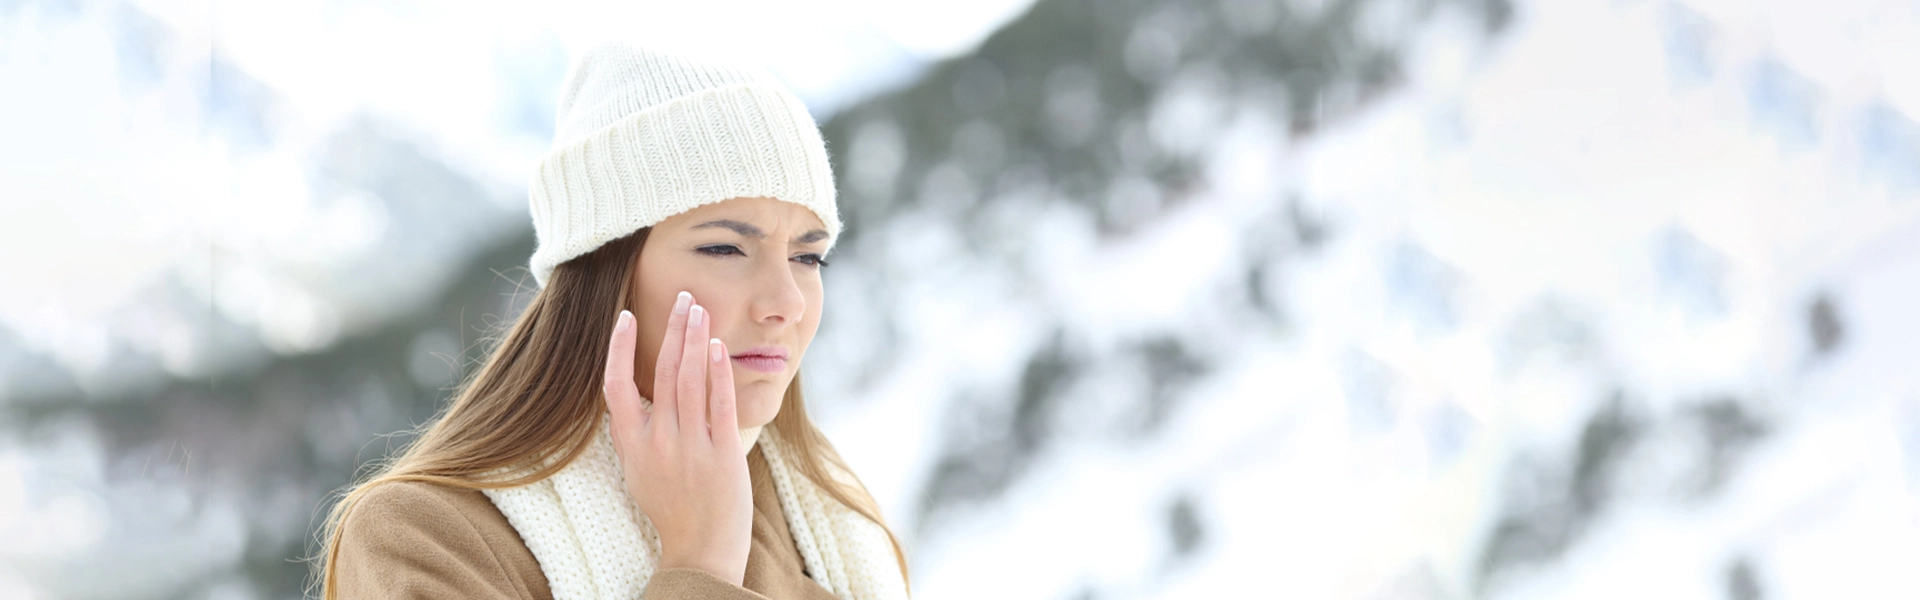 Tired of dry skin on face during winters?